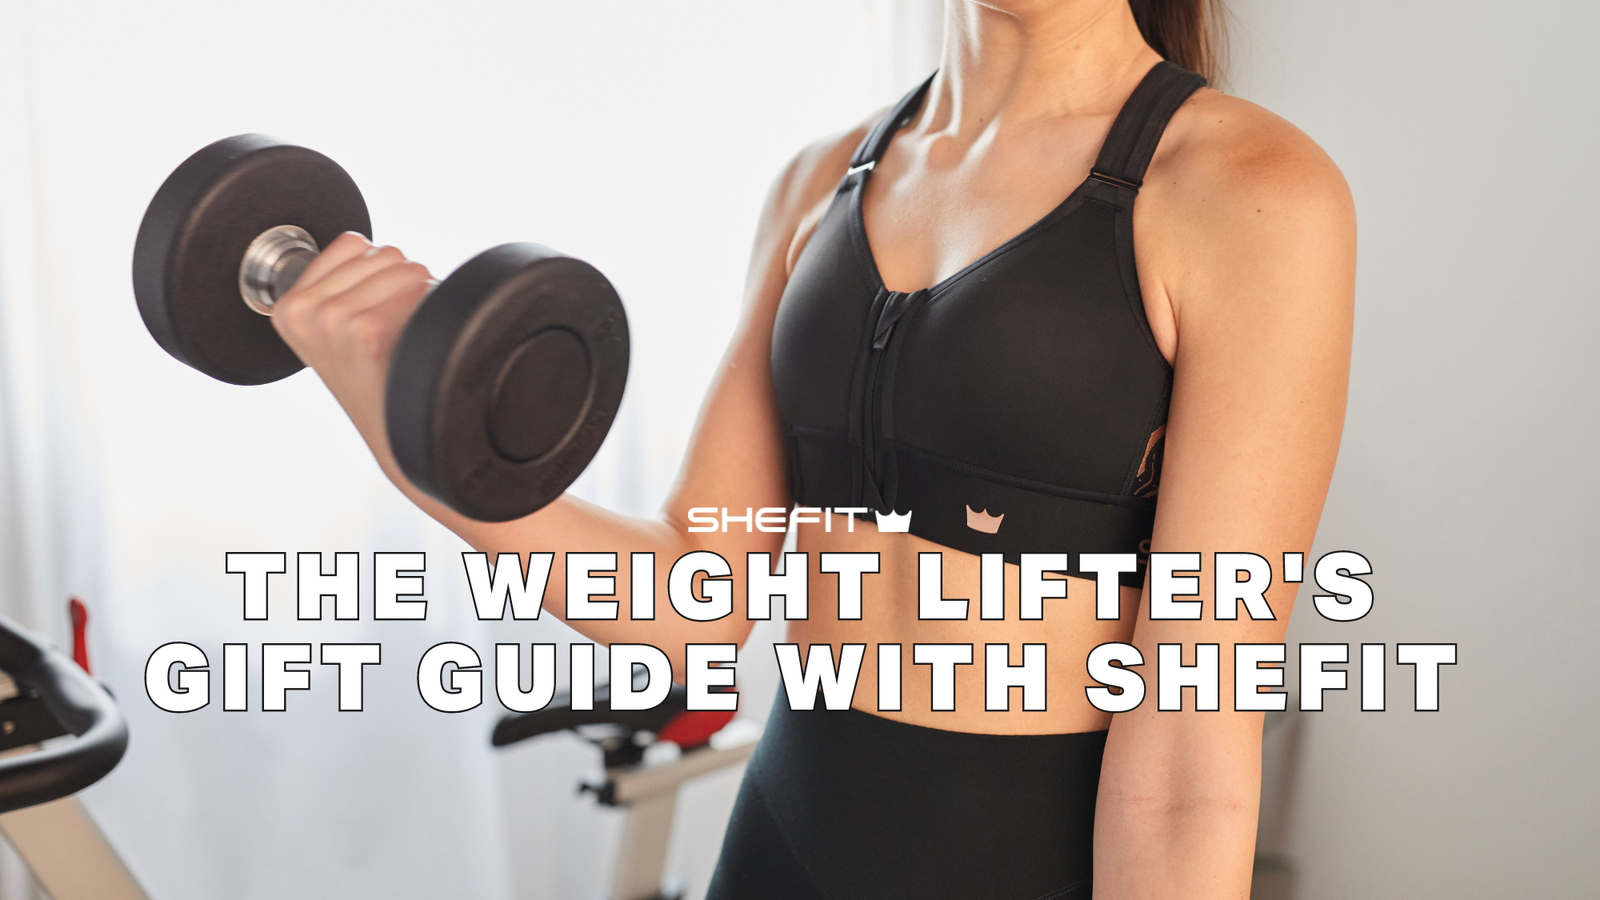 The Weight Lifter's Gift Guide with SHEFIT